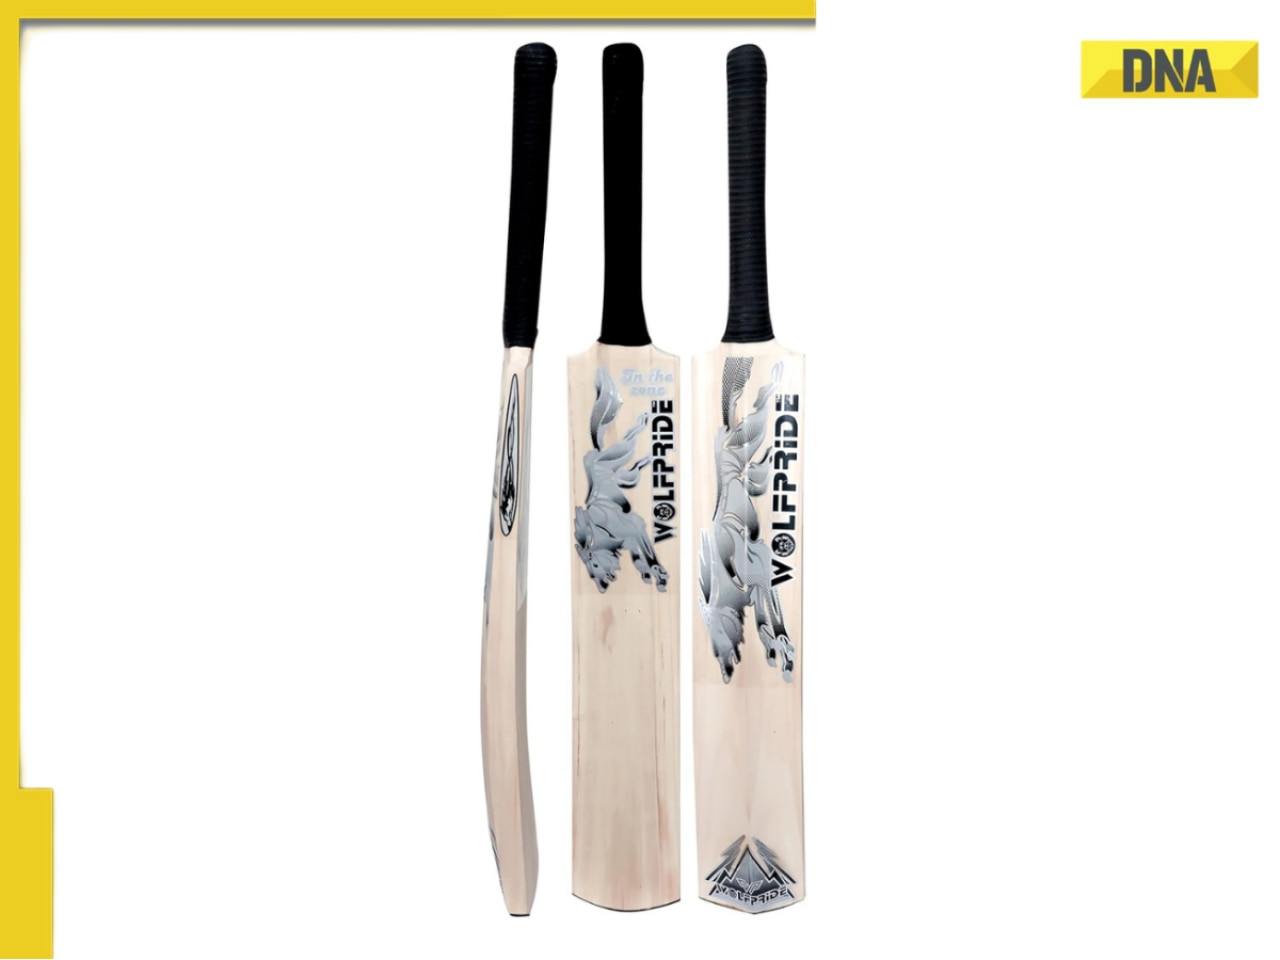 Top 5 Kashmir Willow Cricket Bats Under Rs 1000 Only On Amazon